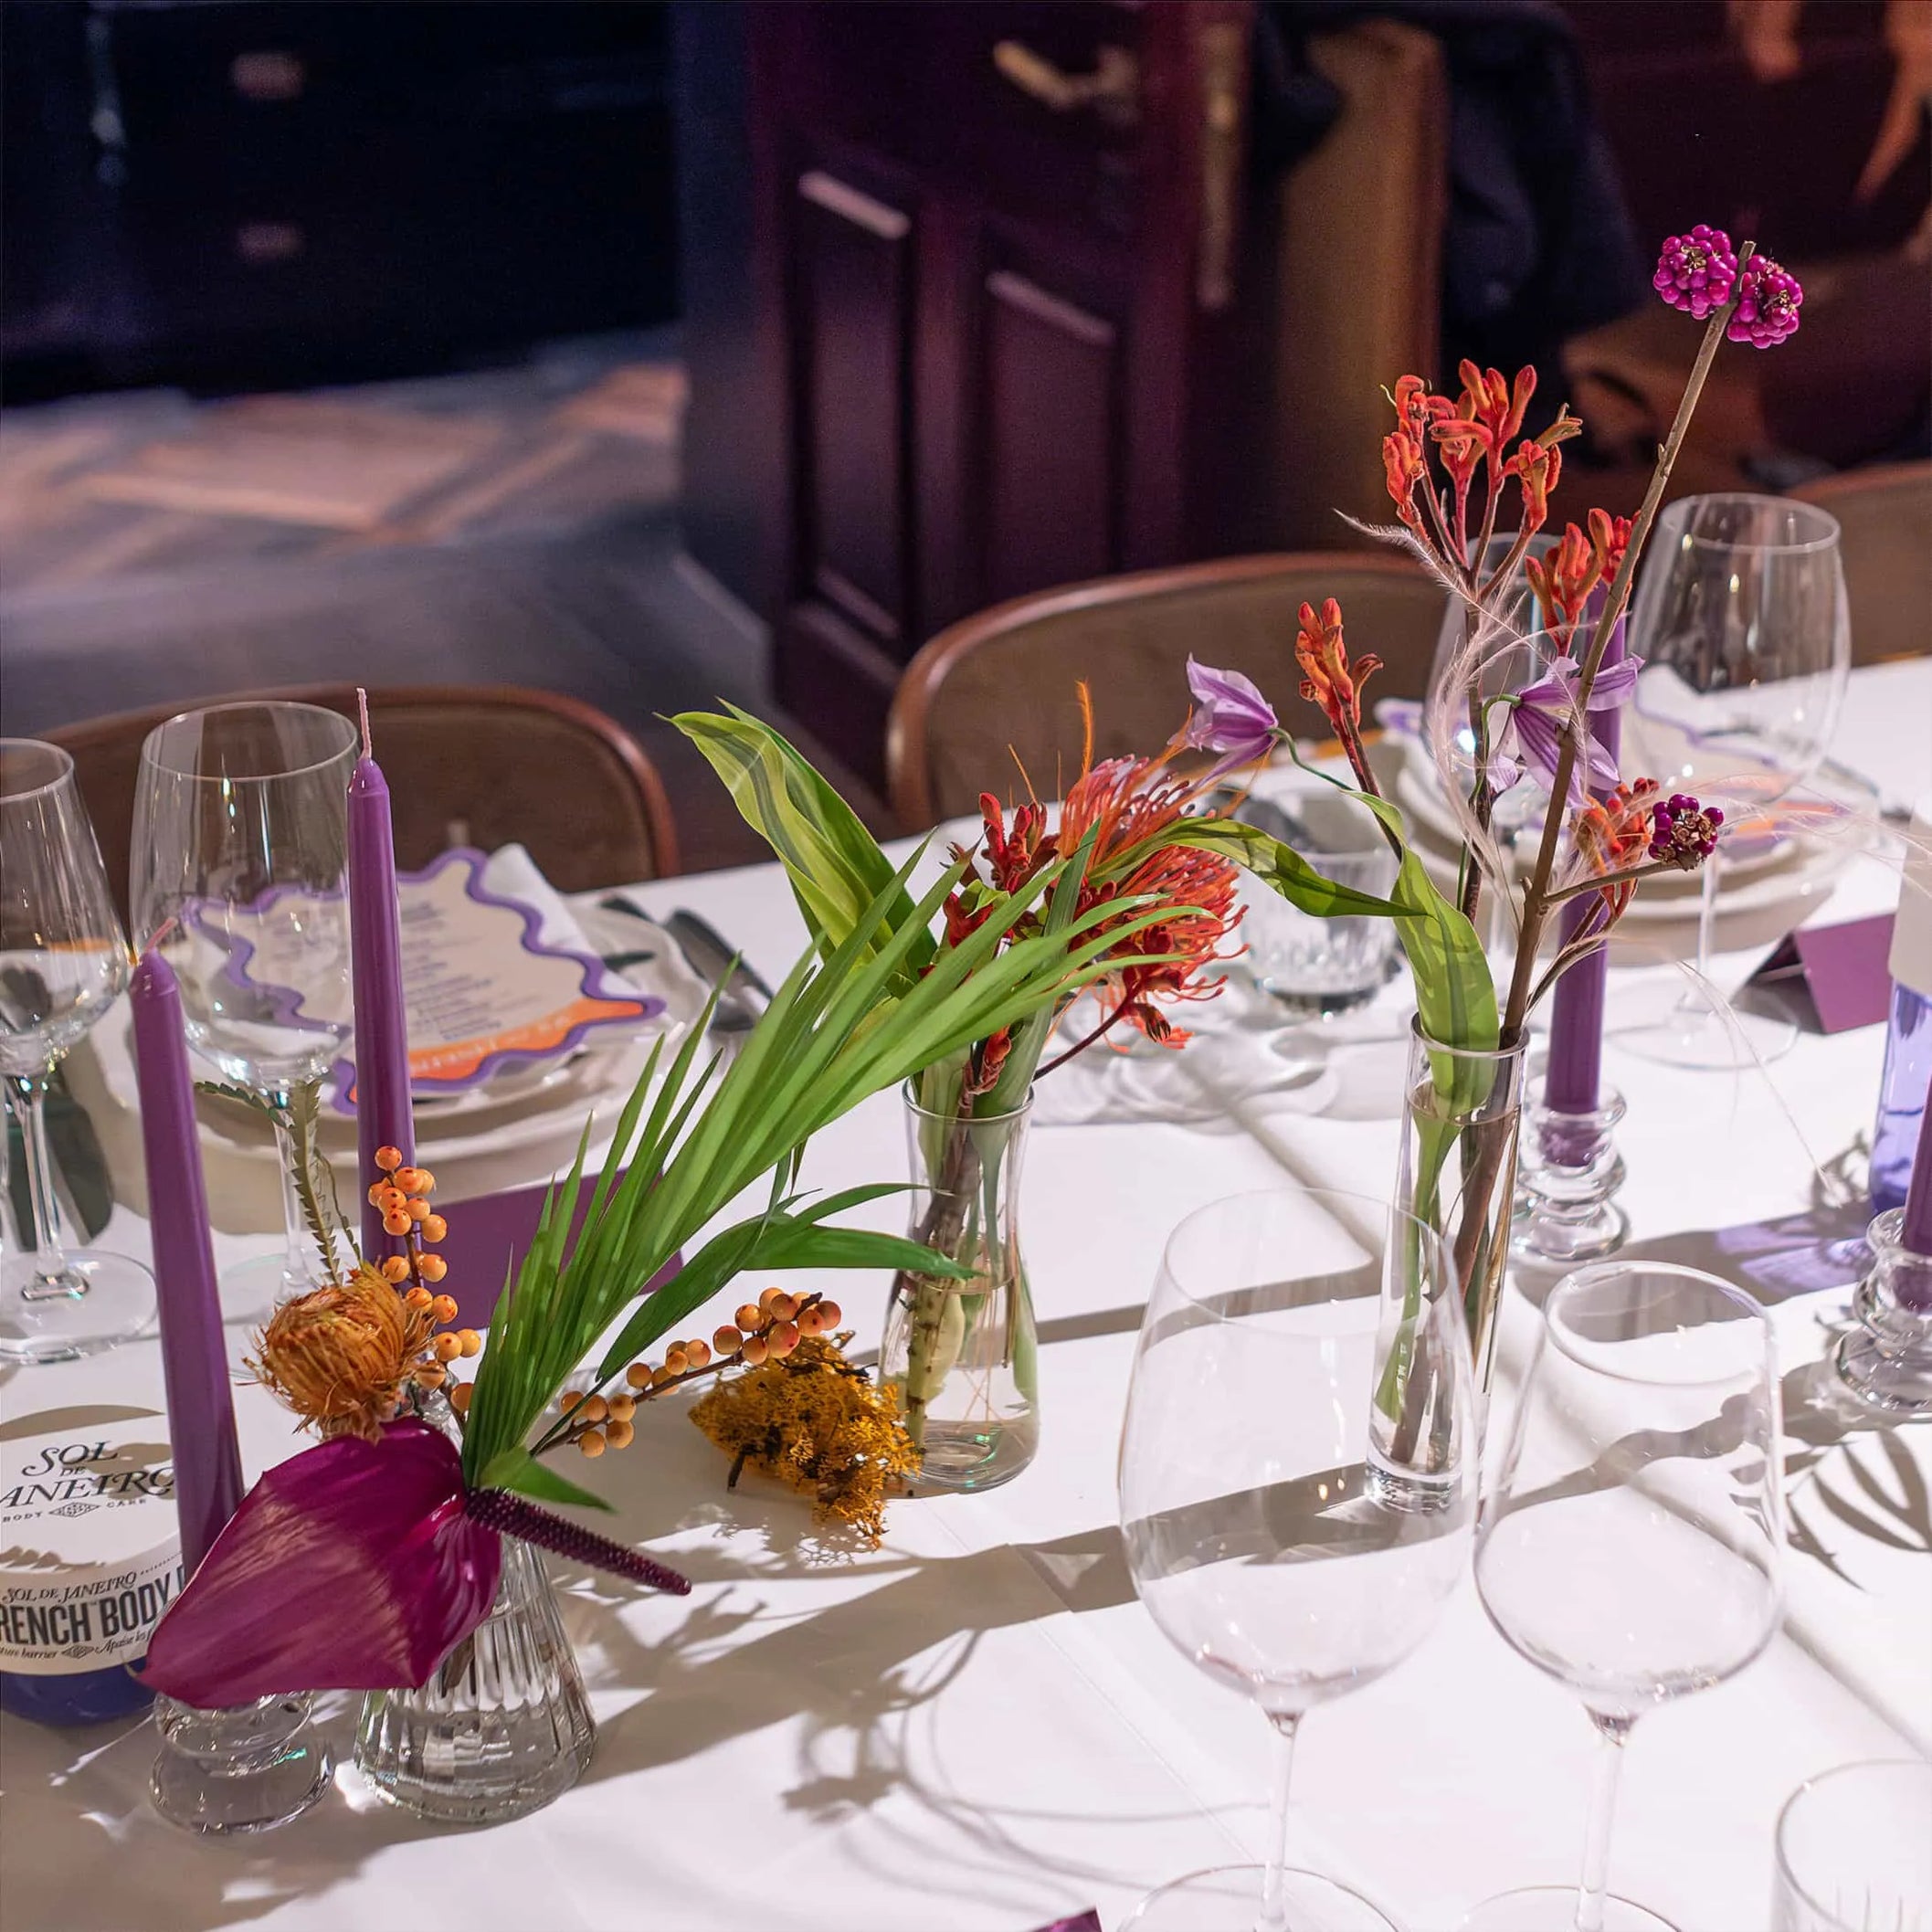 Sophisticated table setting with Amaranté London's floral decorations, featuring slender vases with tropical blooms and candles, prepared for a Sol de Janeiro launch event.